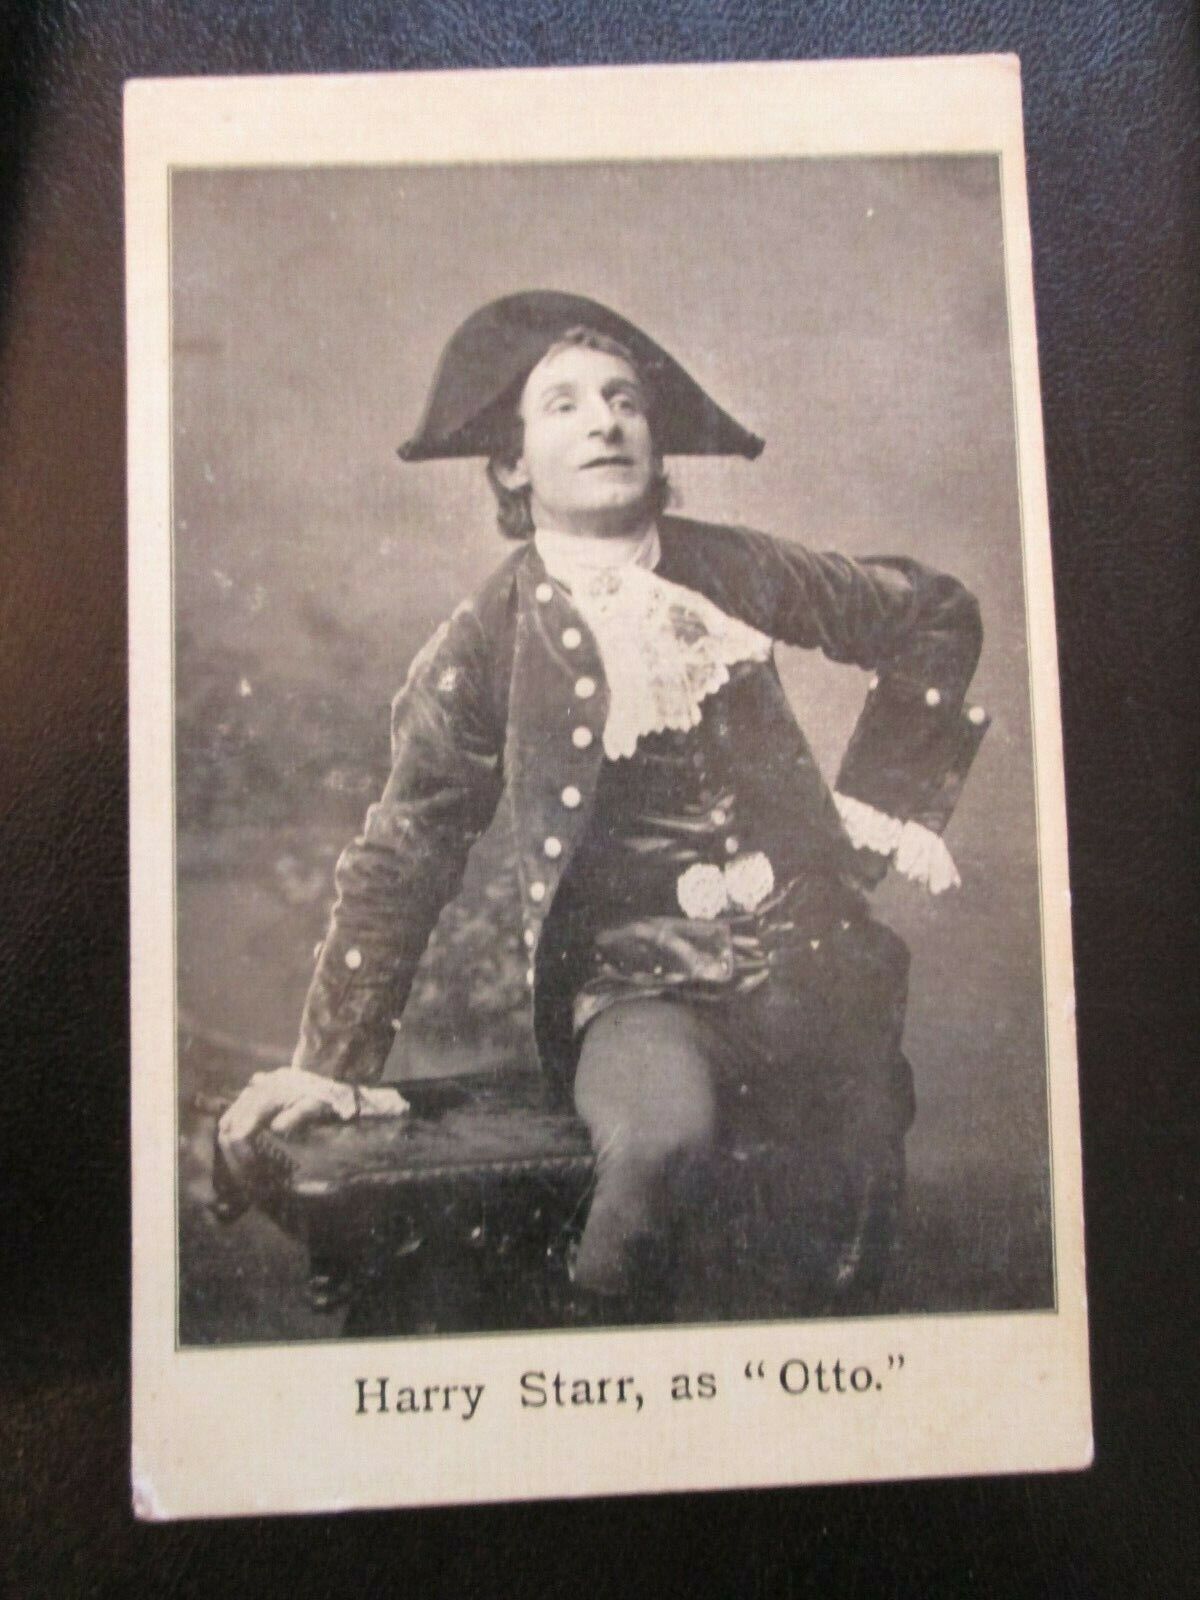 House Clearance - Service of Harry Starr, as "Otto" (Unposted Durham?)